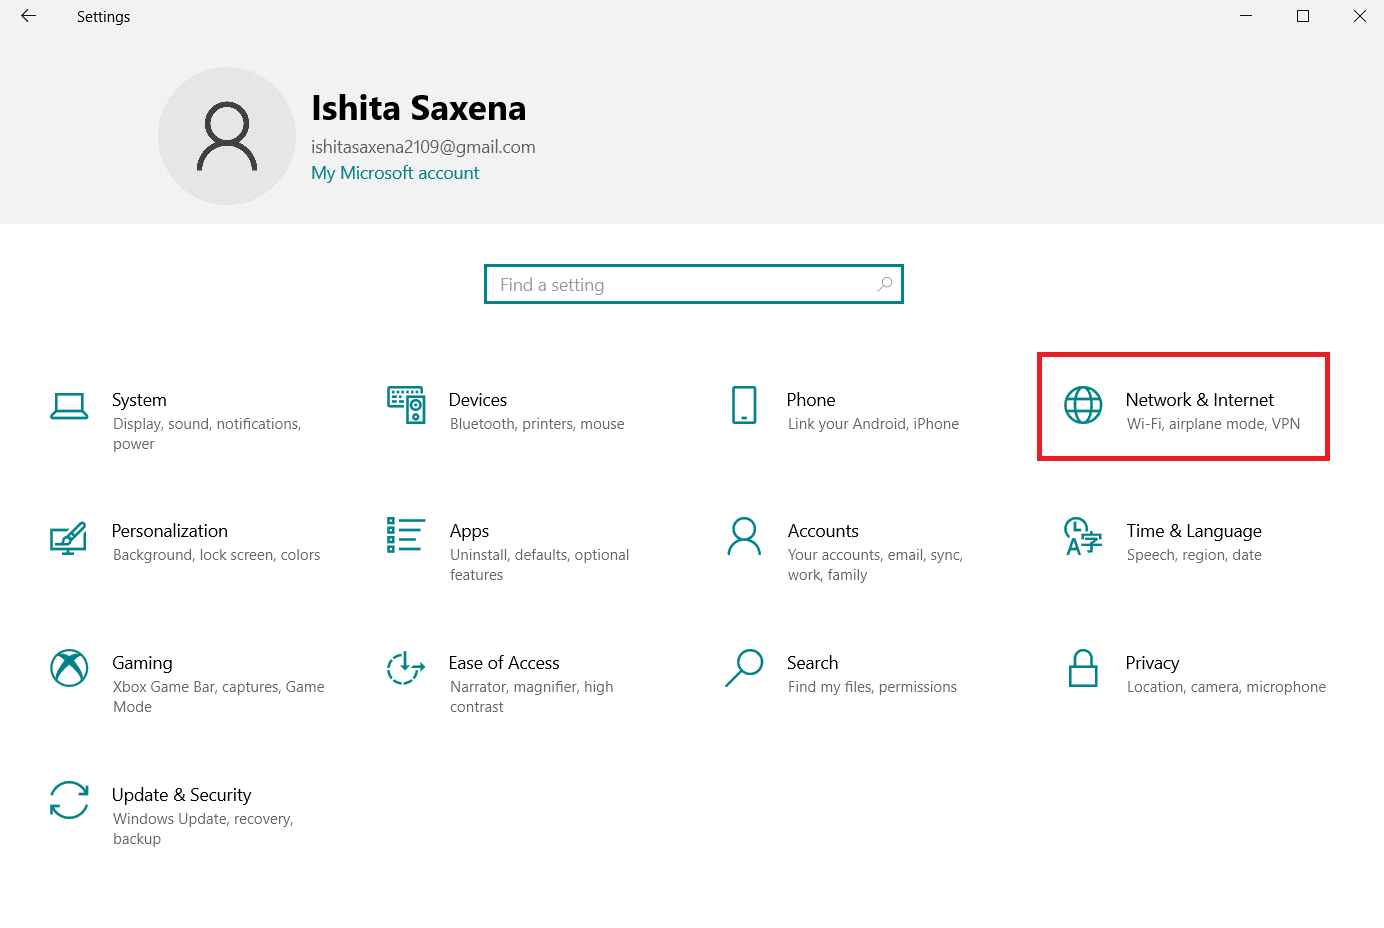 Navigate to the Network and Internet section of the settings menu